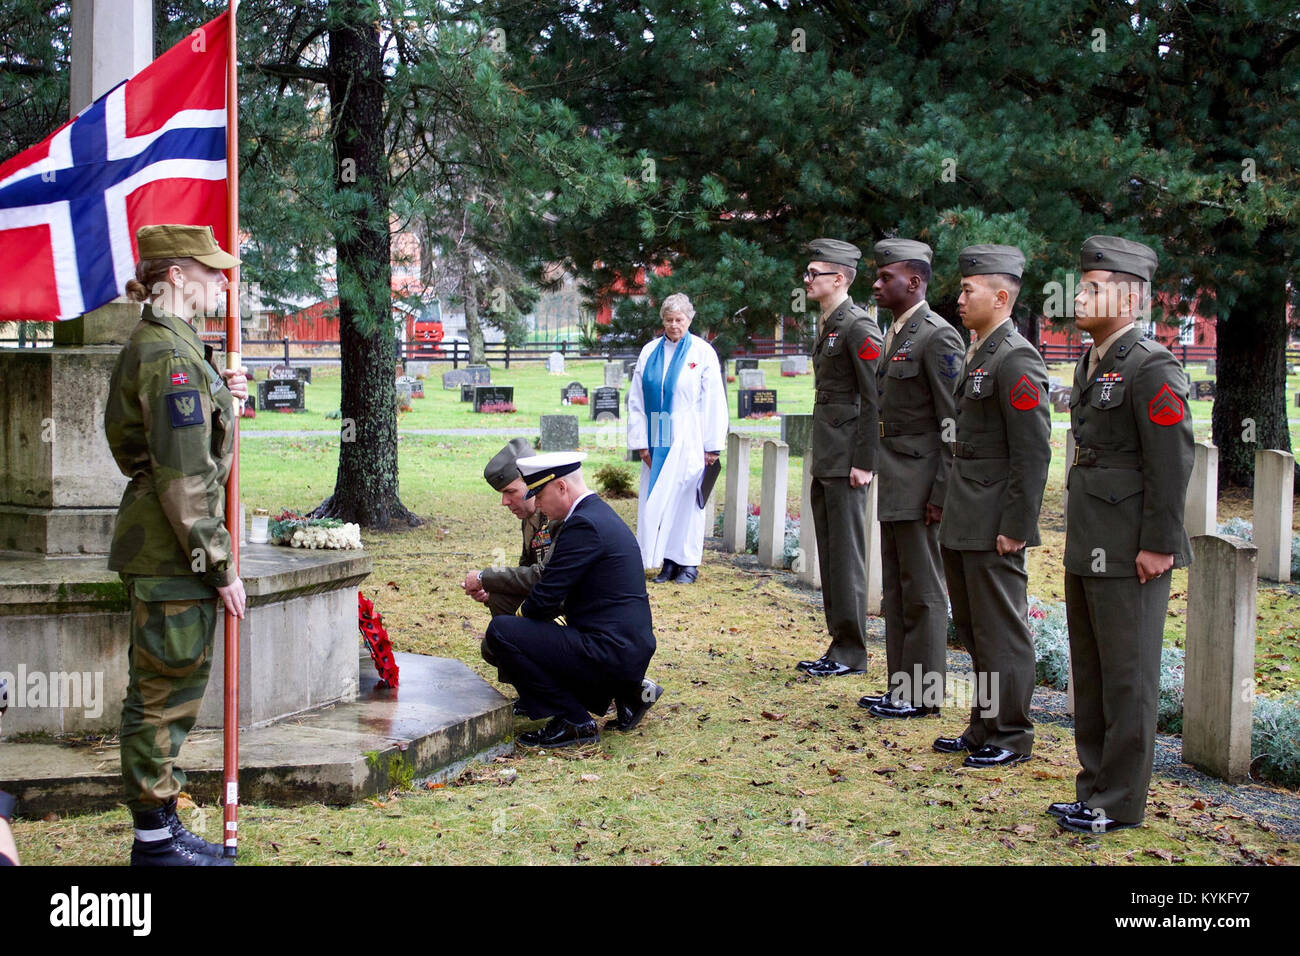 TRONDHEIM, Norway (Nov. 16, 2017) U.S. Marines and a Navy chaplain assigned to Marine Rotational Force Europe 17.2 place a wreath on a memorial site in Trondheim, Norway. The memorial is dedicated to all fallen soldiers from past and present conflicts. Events like this help the U.S. and Norway to preserve mutual commitment and trust in confronting evolving strategic challenges together. (U.S. Marine Corps photo by Lance Cpl. Jesus Flores/Released)171116-M-ZH337-101 Stock Photo